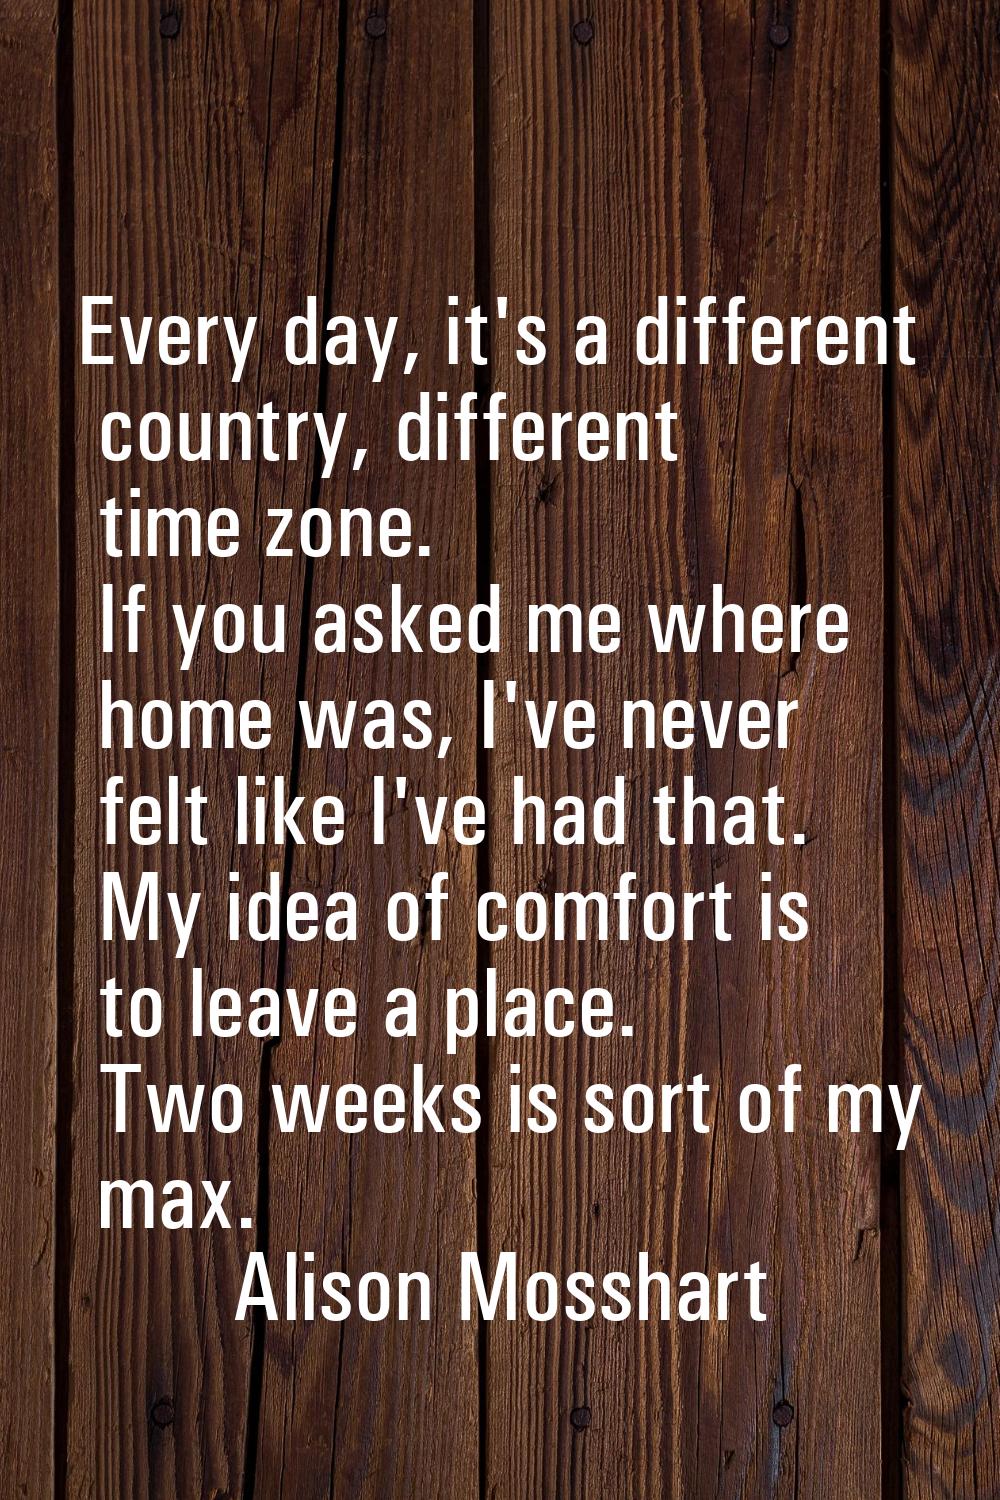 Every day, it's a different country, different time zone. If you asked me where home was, I've neve